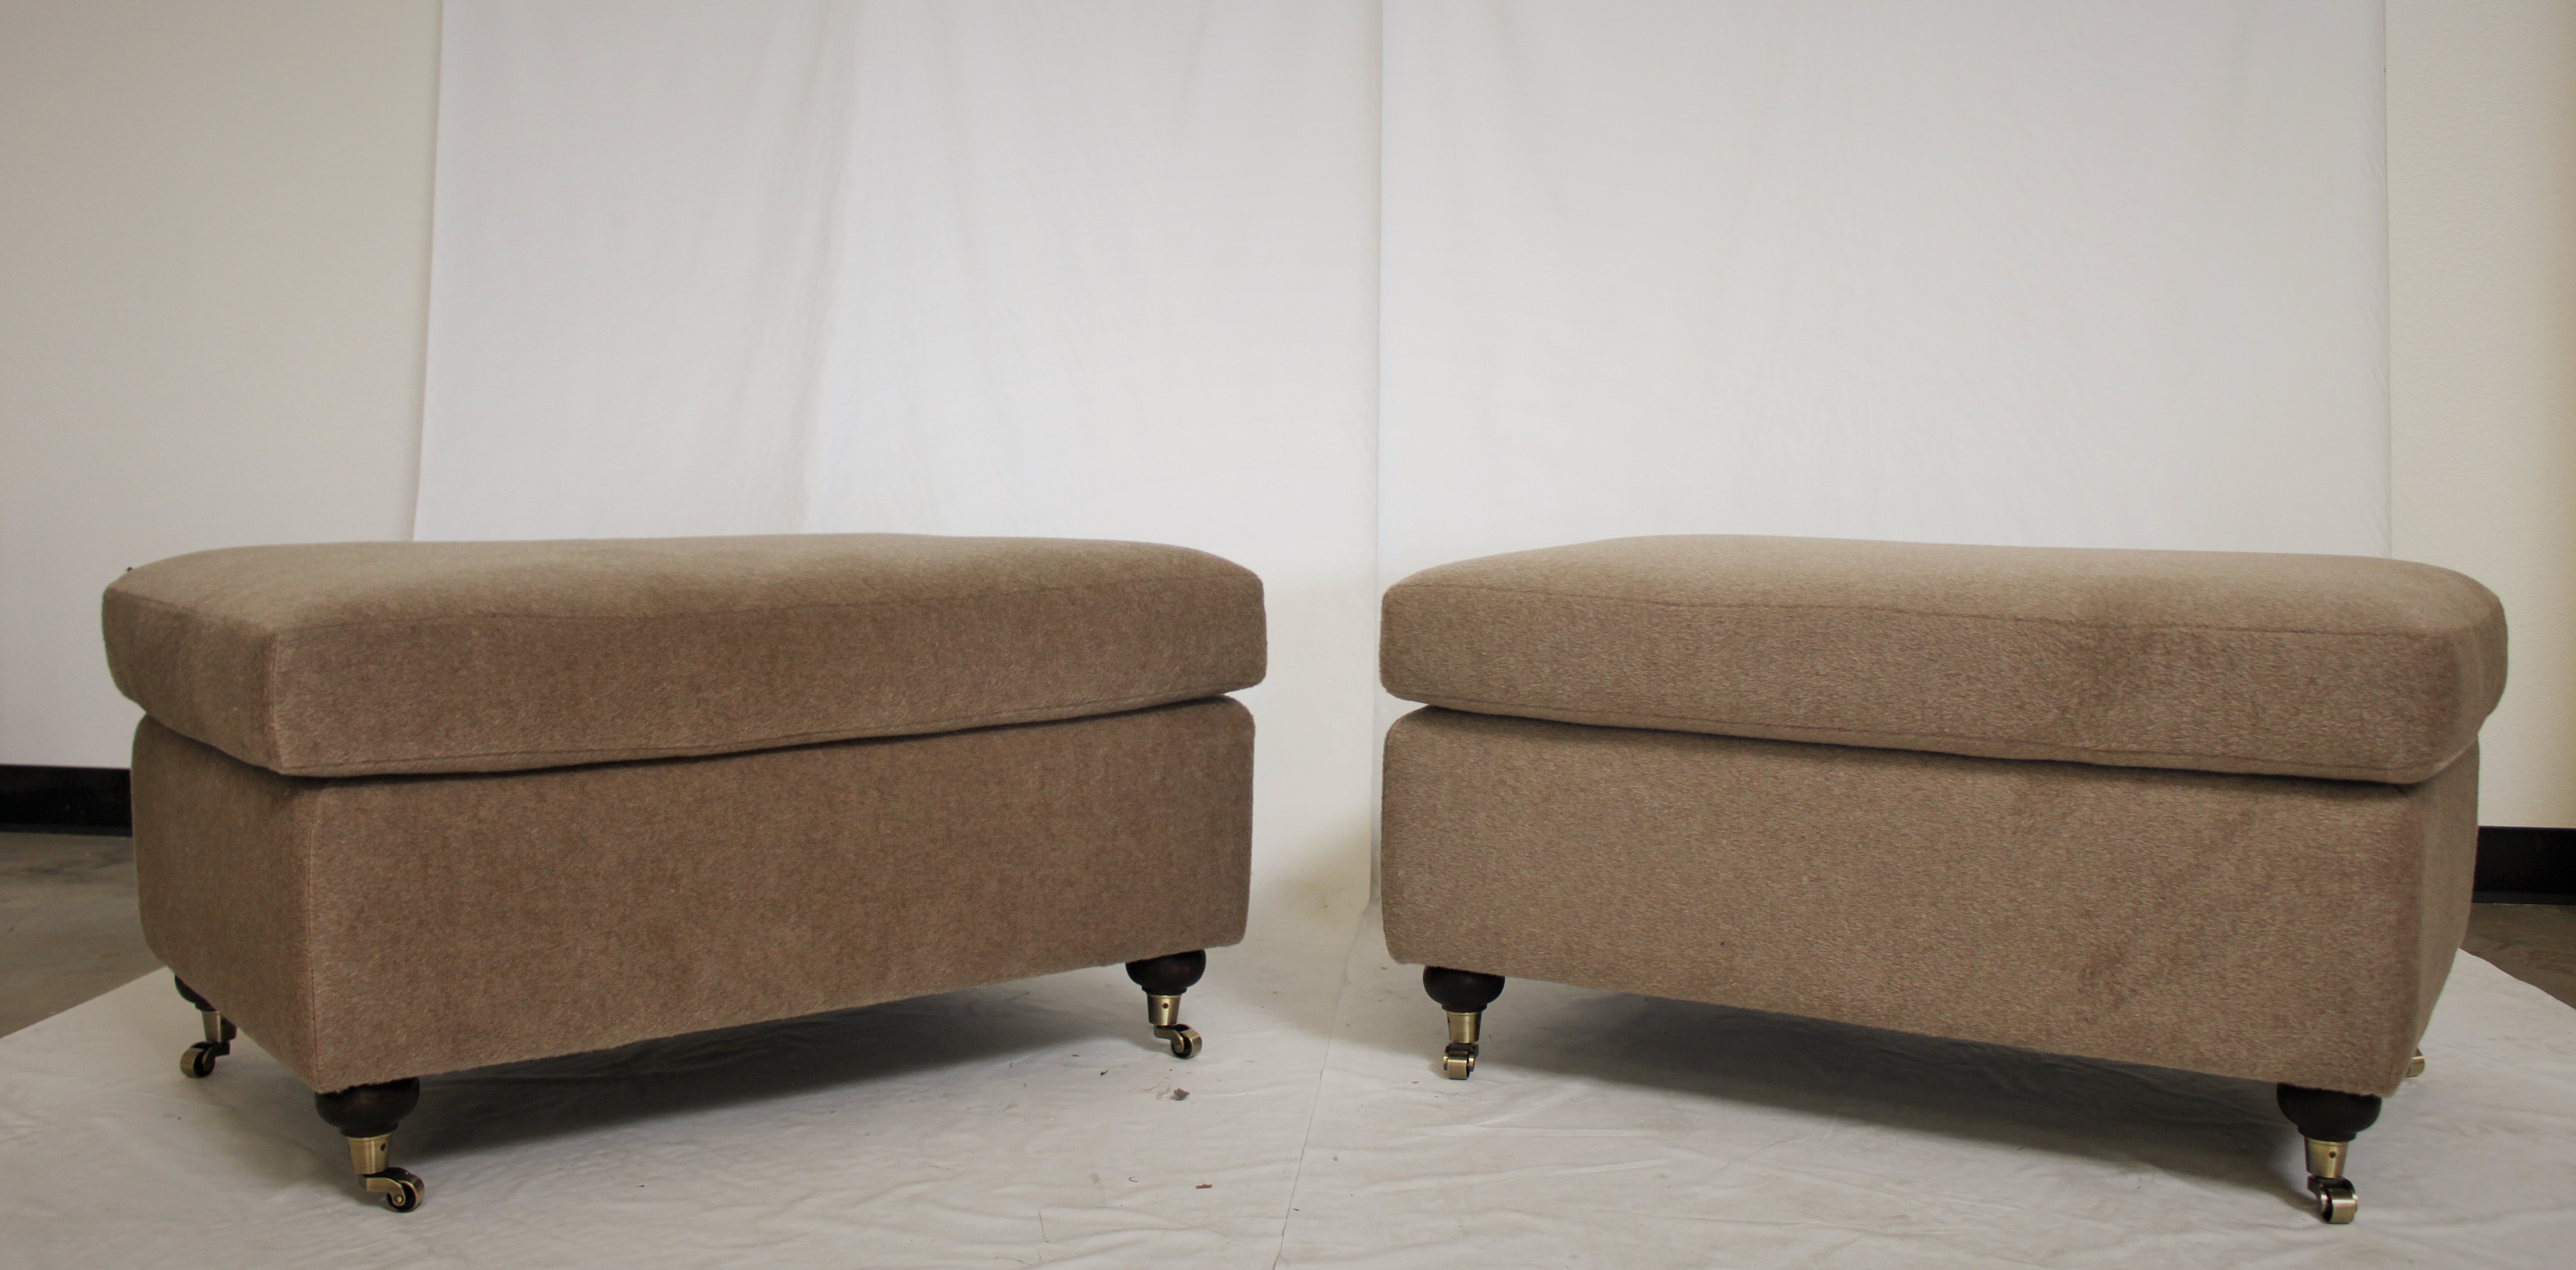 Matching Ottomans with Decorative Casters